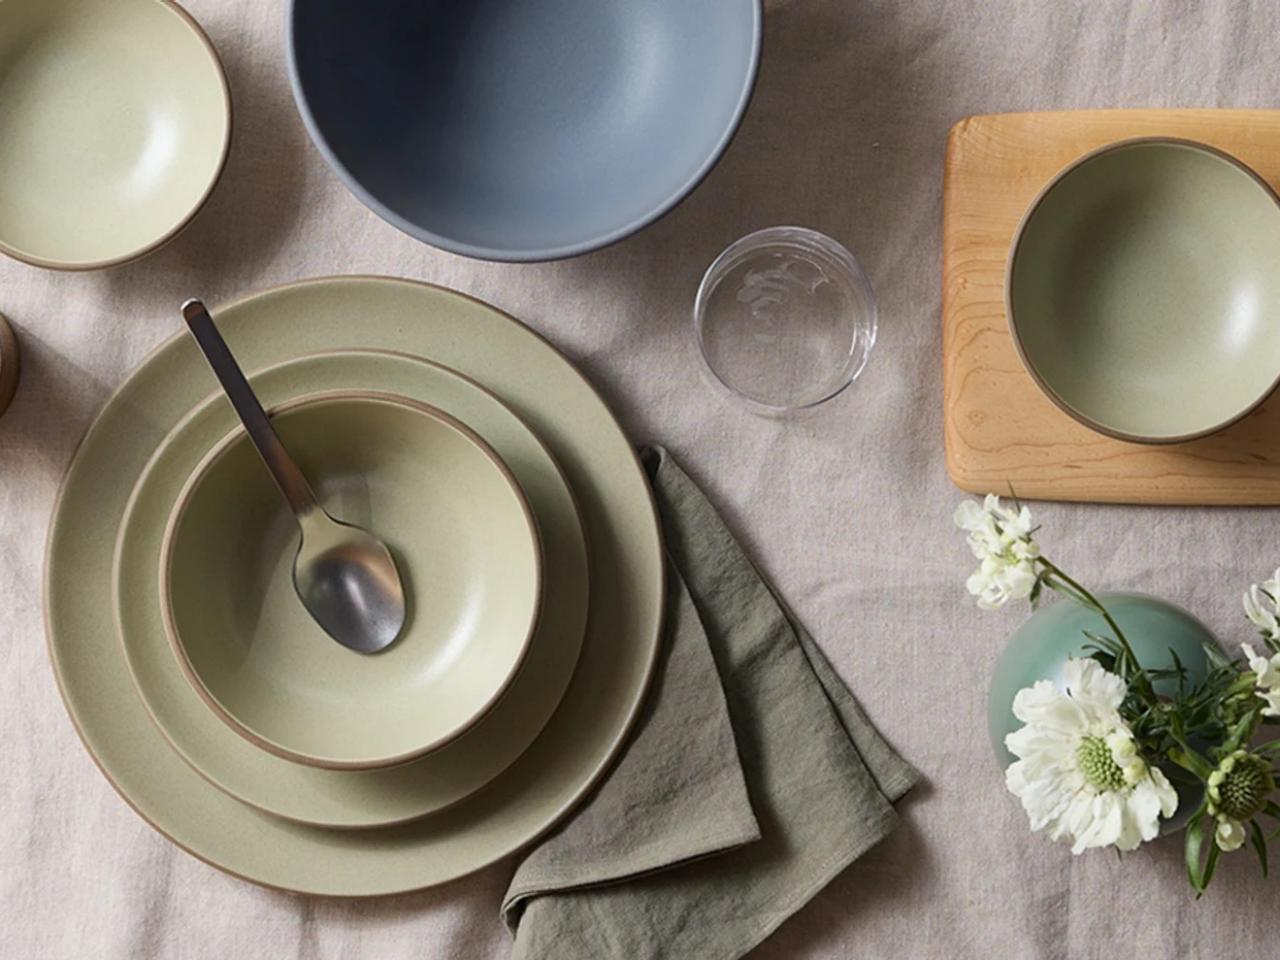 Anyday Just Launched Their Famous Microwave-Safe Plates in a New Color